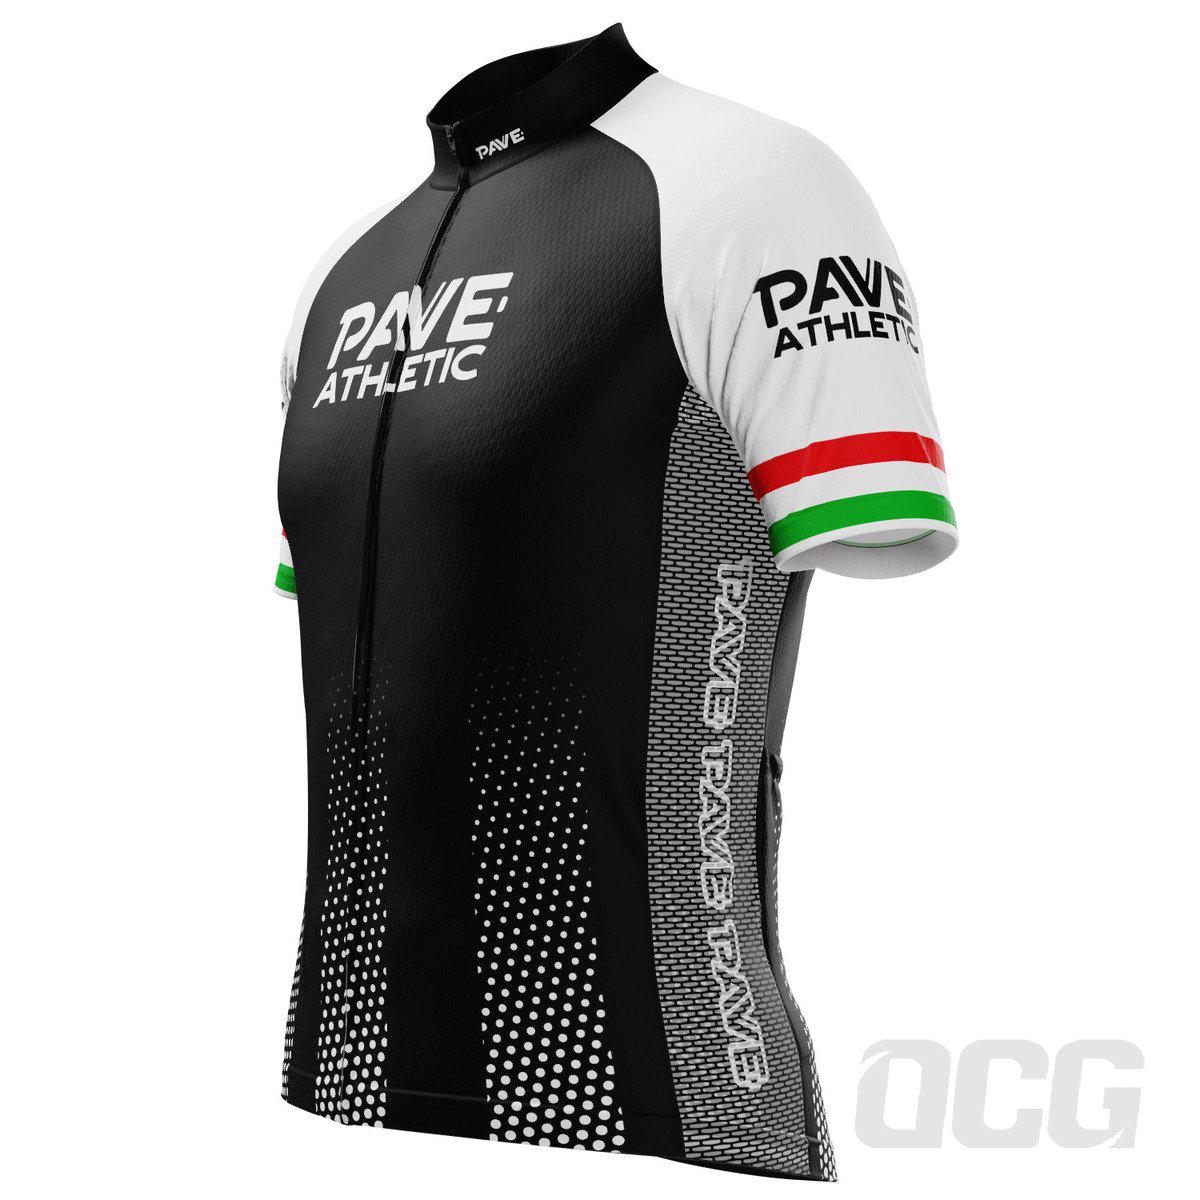 PAVE Athletic Squadra Modern Short Sleeve Cycling Jersey